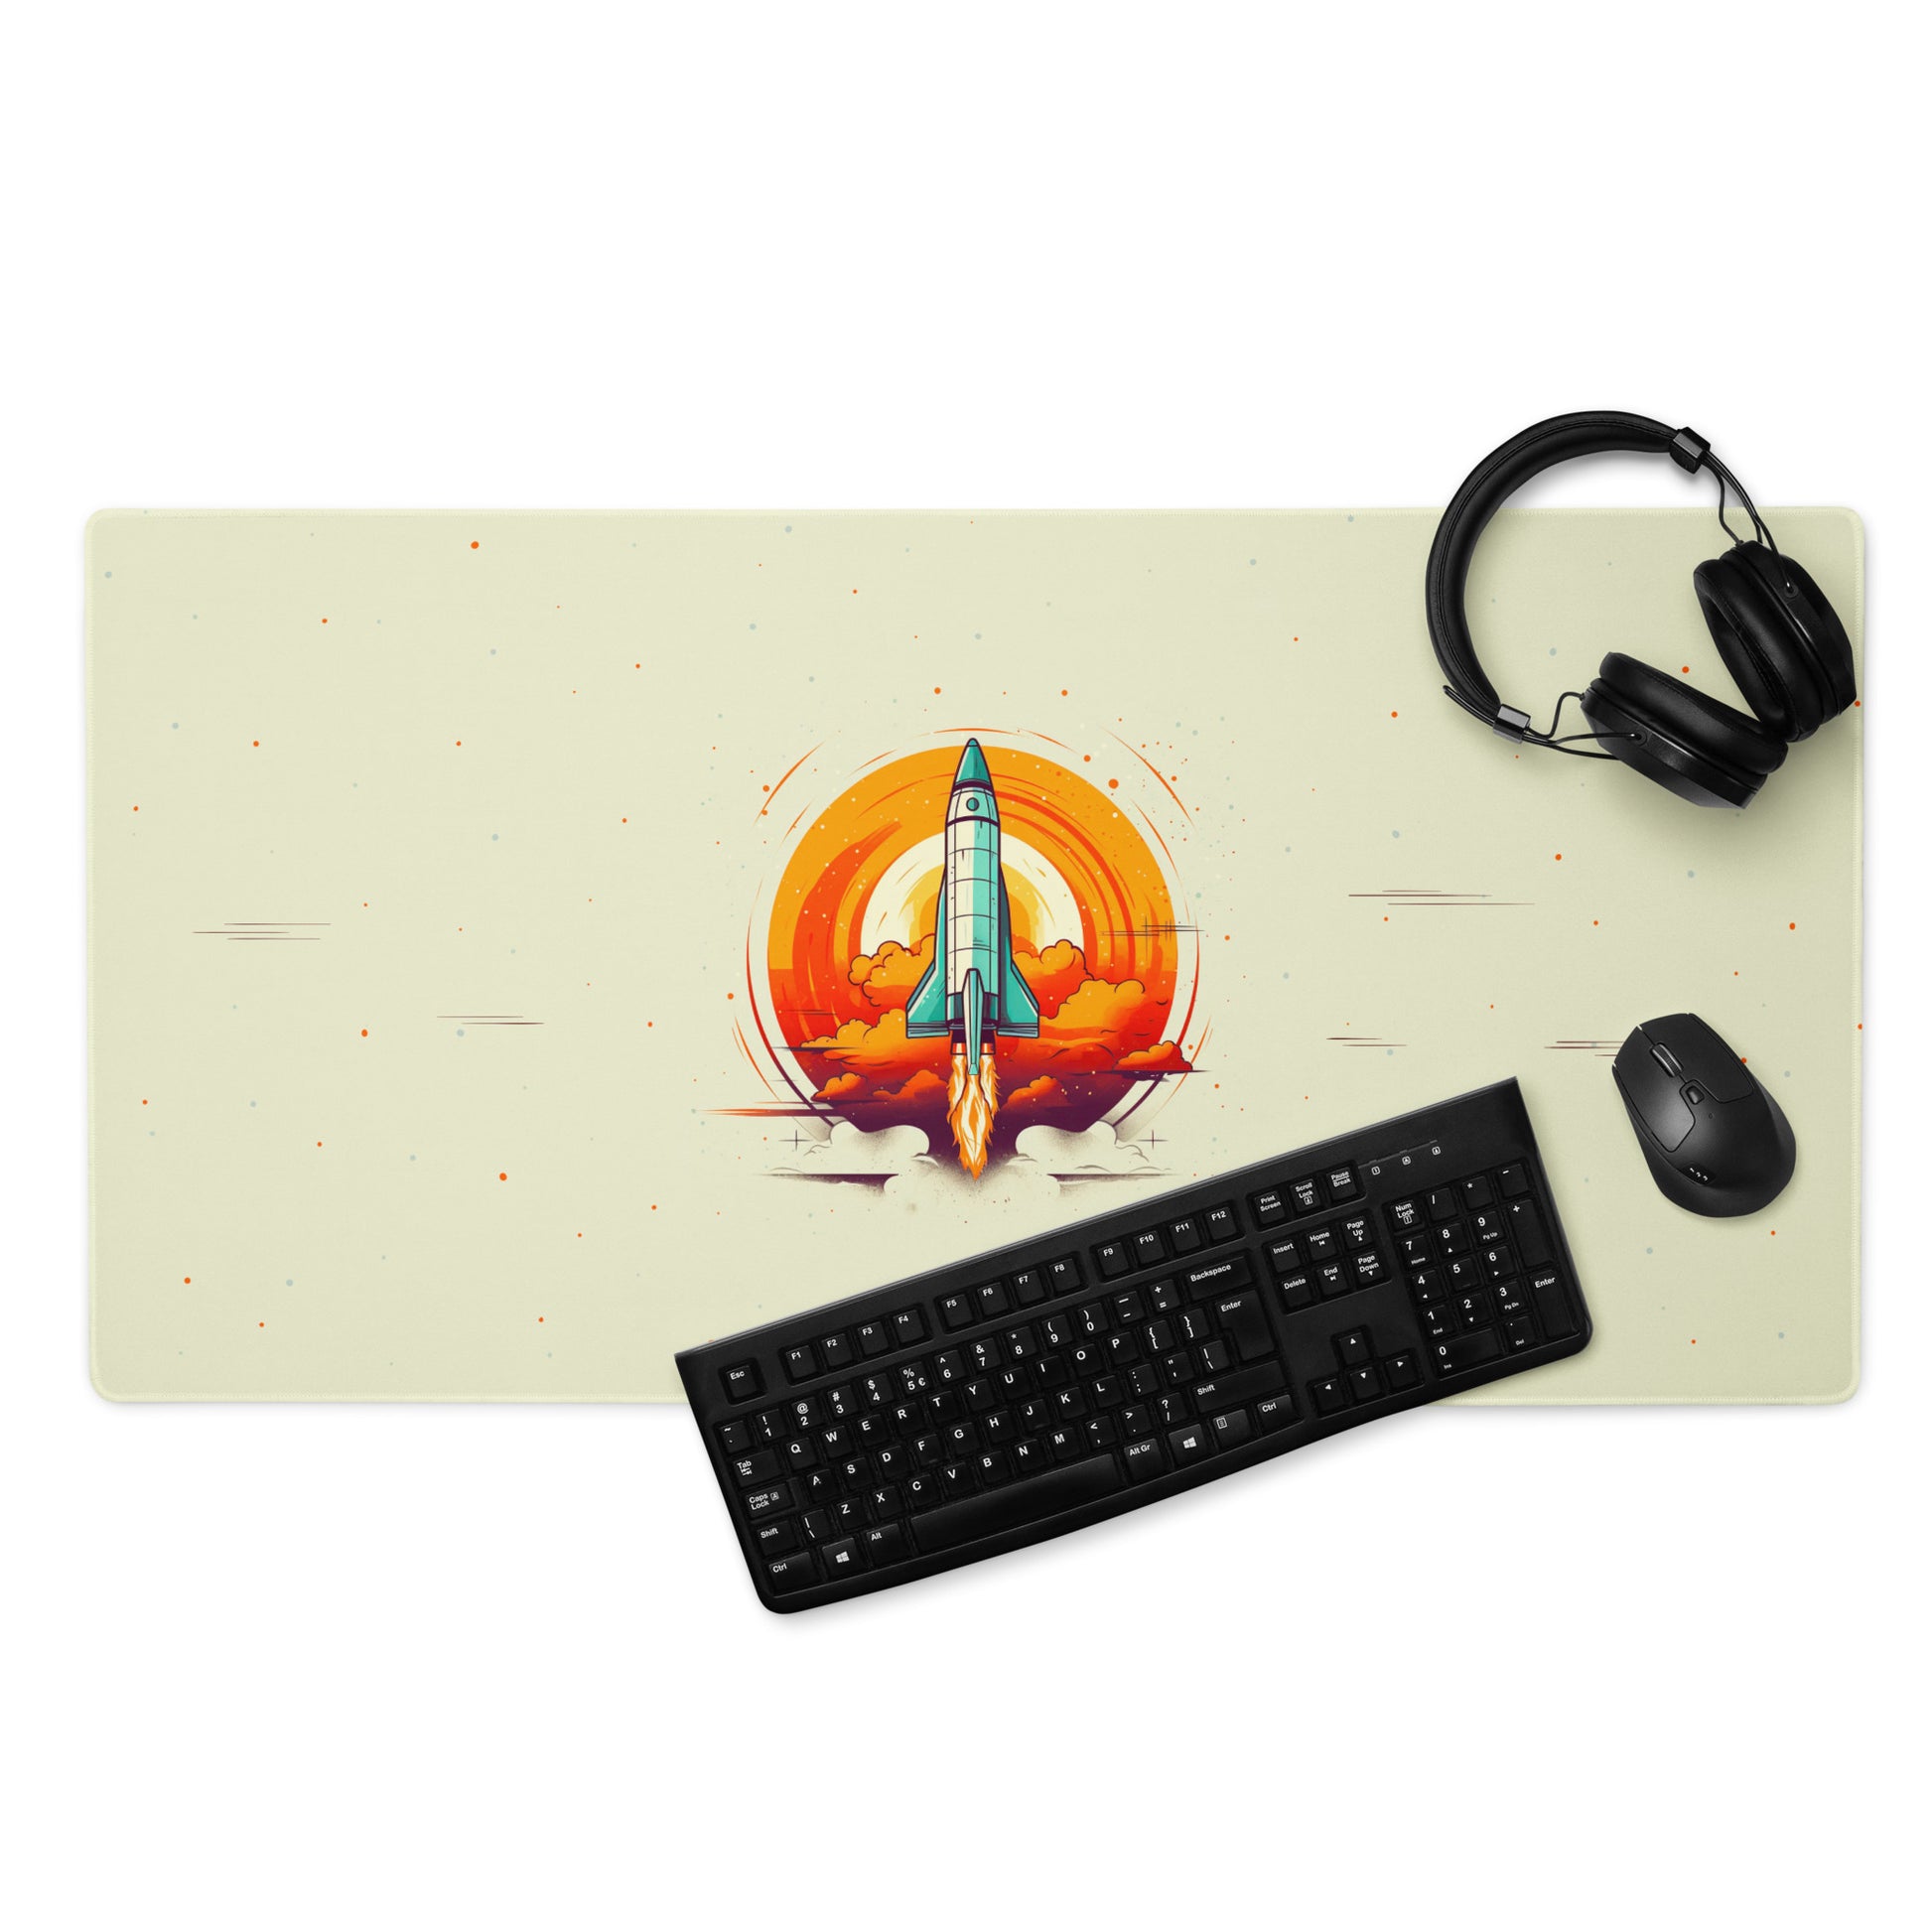 A 36" x 18" desk pad with a space shuttle blasting off. With a keyboard, mouse, and headphones sitting on it. Beige in color.